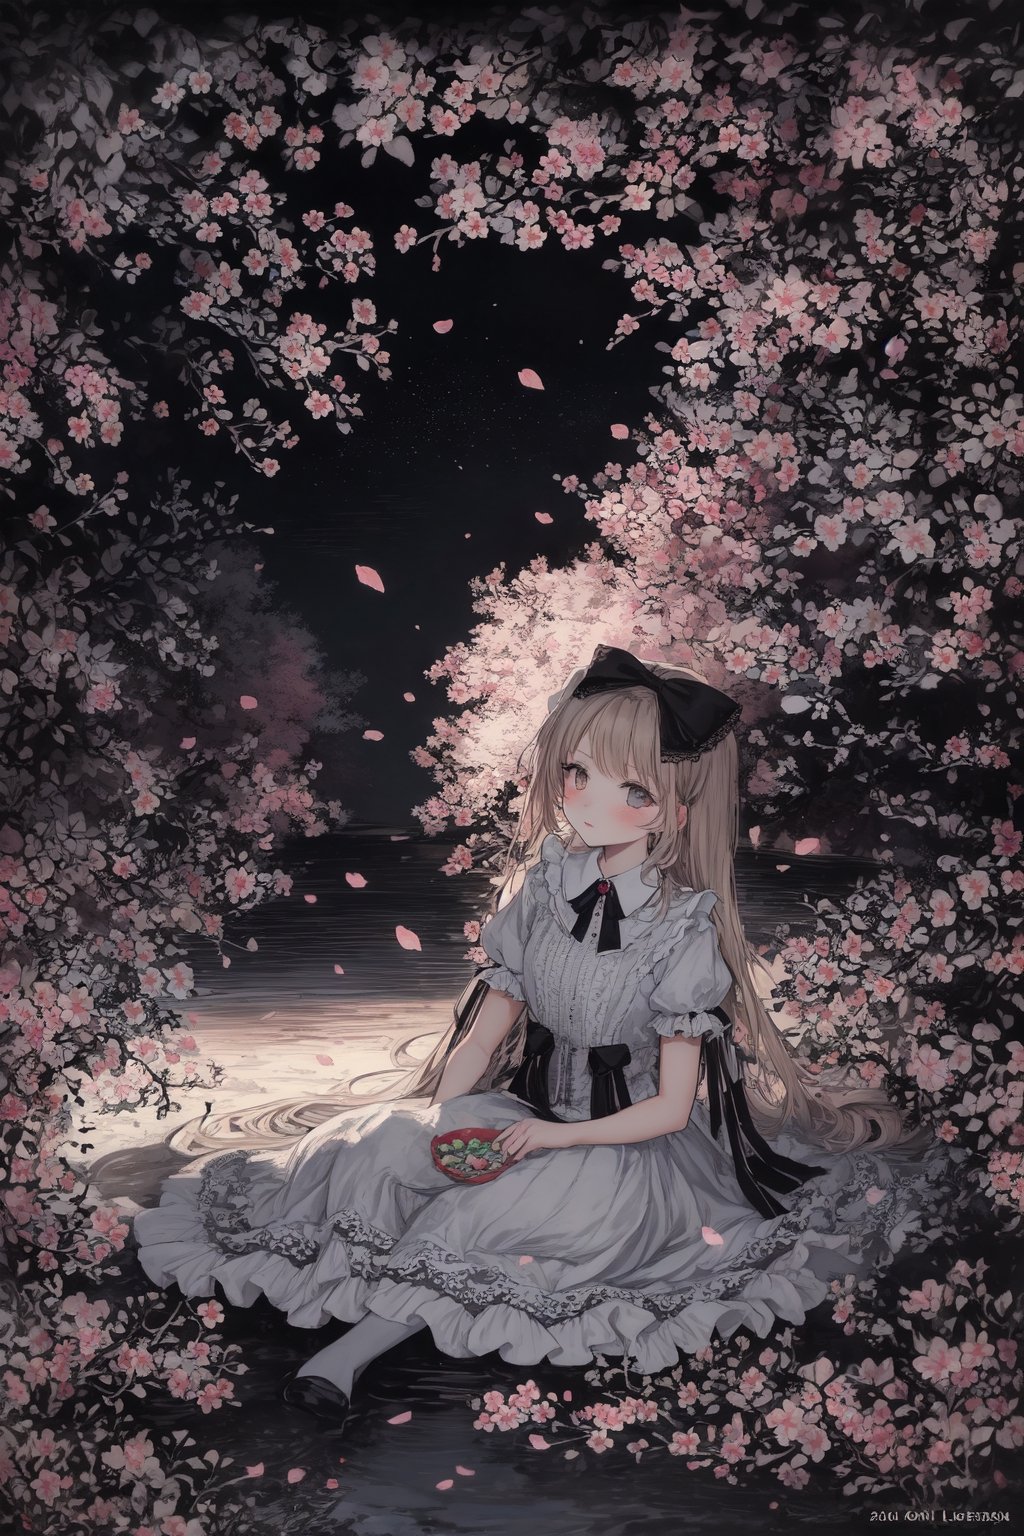 girl in lolita dress, pastel colors, intricate lace details, bow accents, in a blooming cherry blossom garden, with petals floating in the air, surrounded by whimsical fairy lights, a serene and ethereal atmosphere, painting